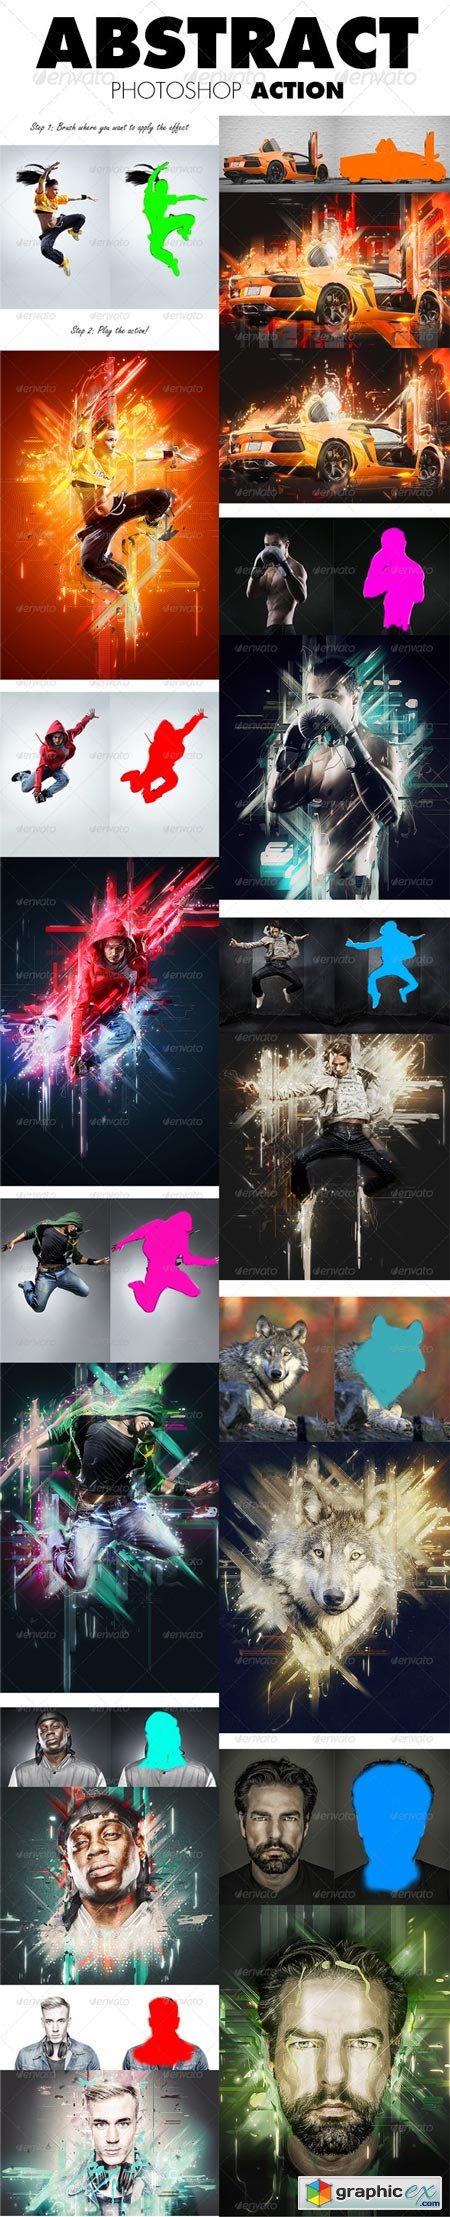 Abstract Photoshop Action 8677875